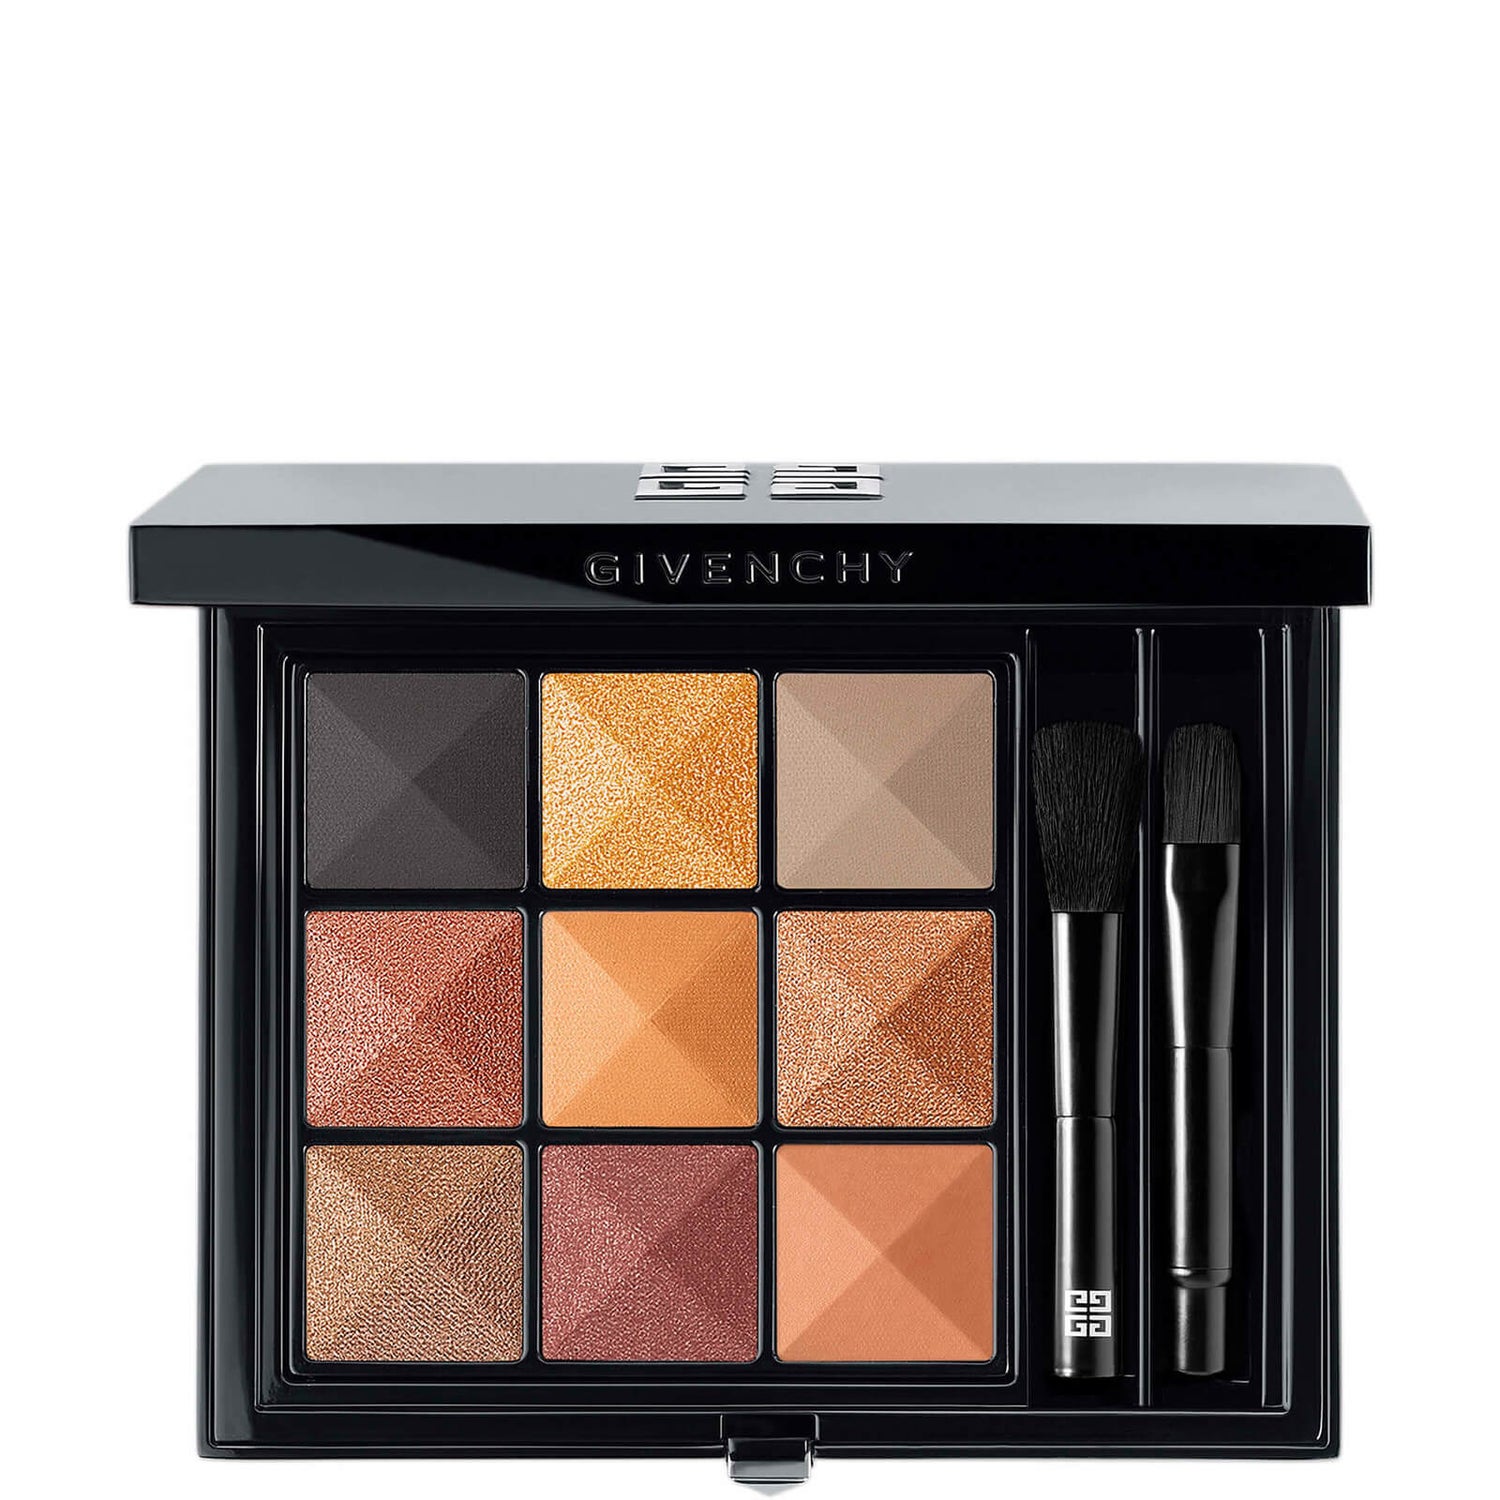 Givenchy Le 9 Multi-Finish Eyeshadows Palette 8g (Various Options)